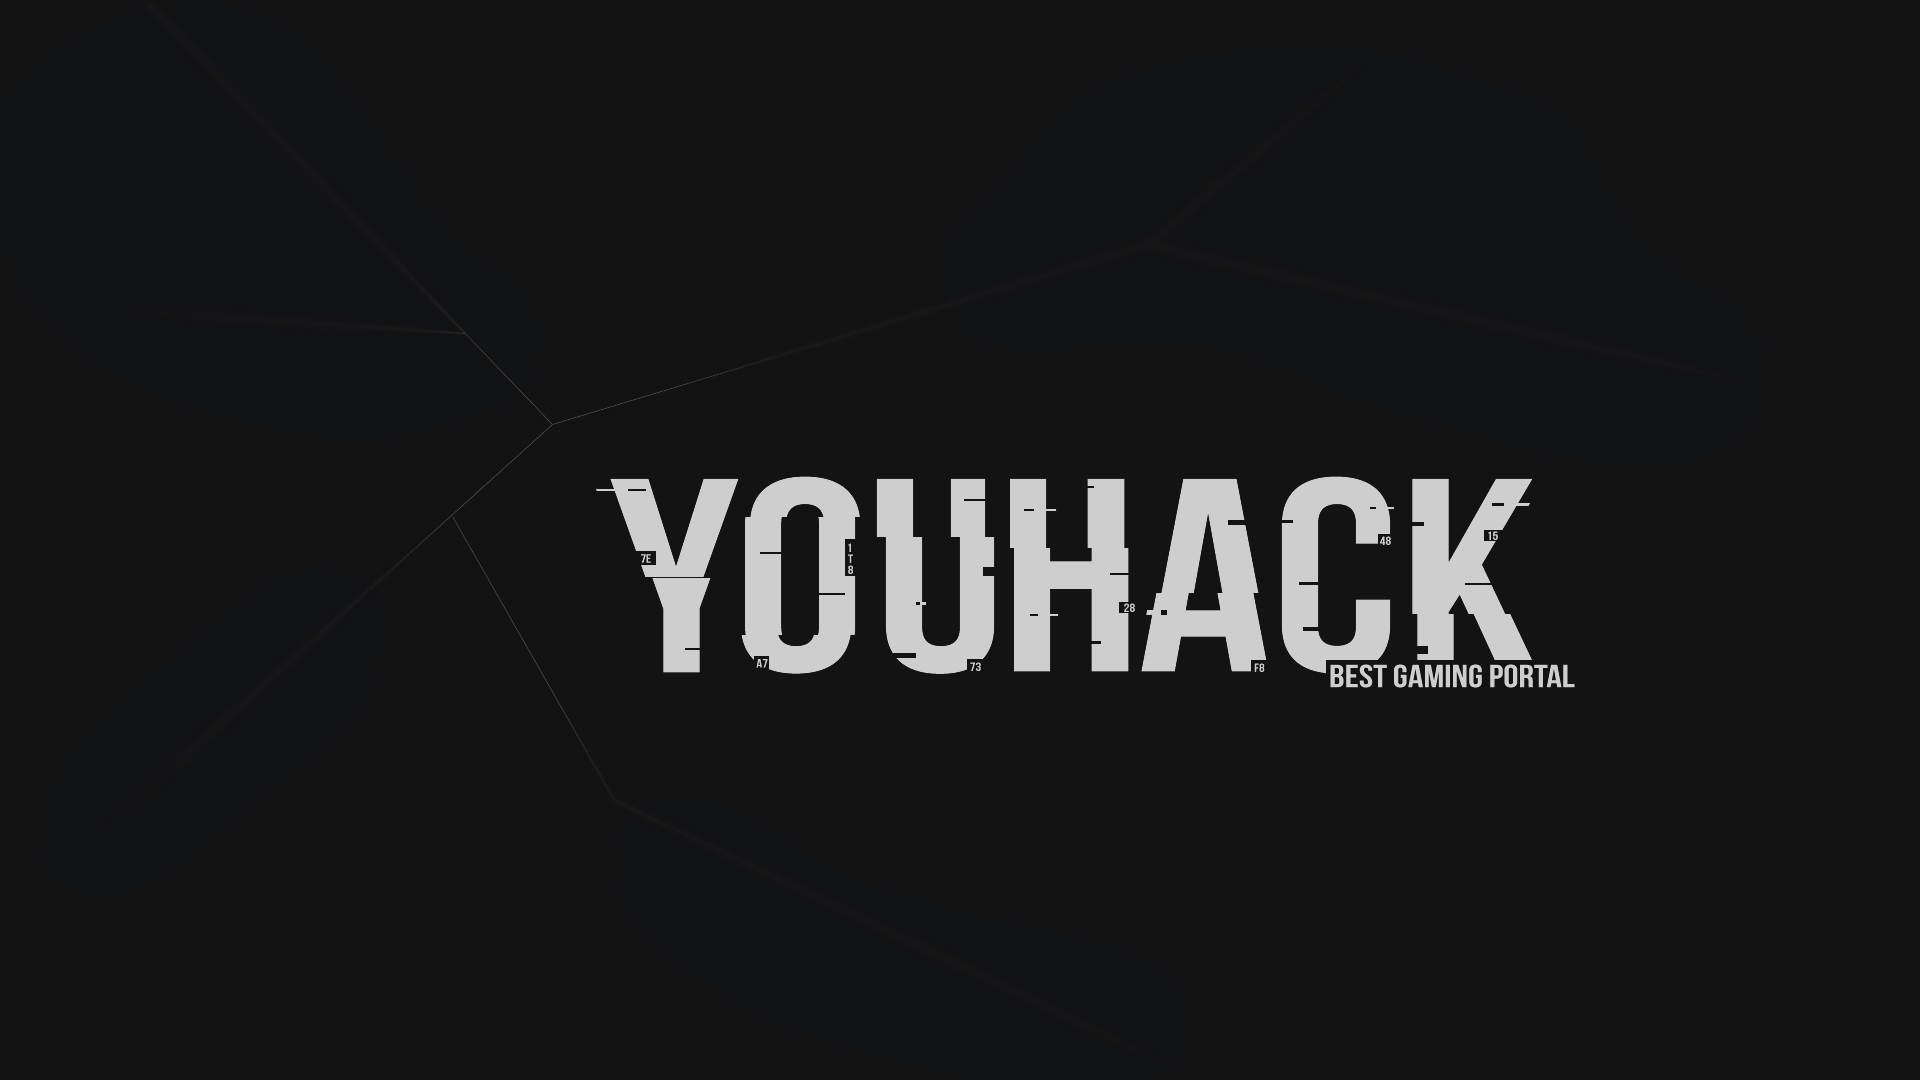 I have been hacked on steam фото 56